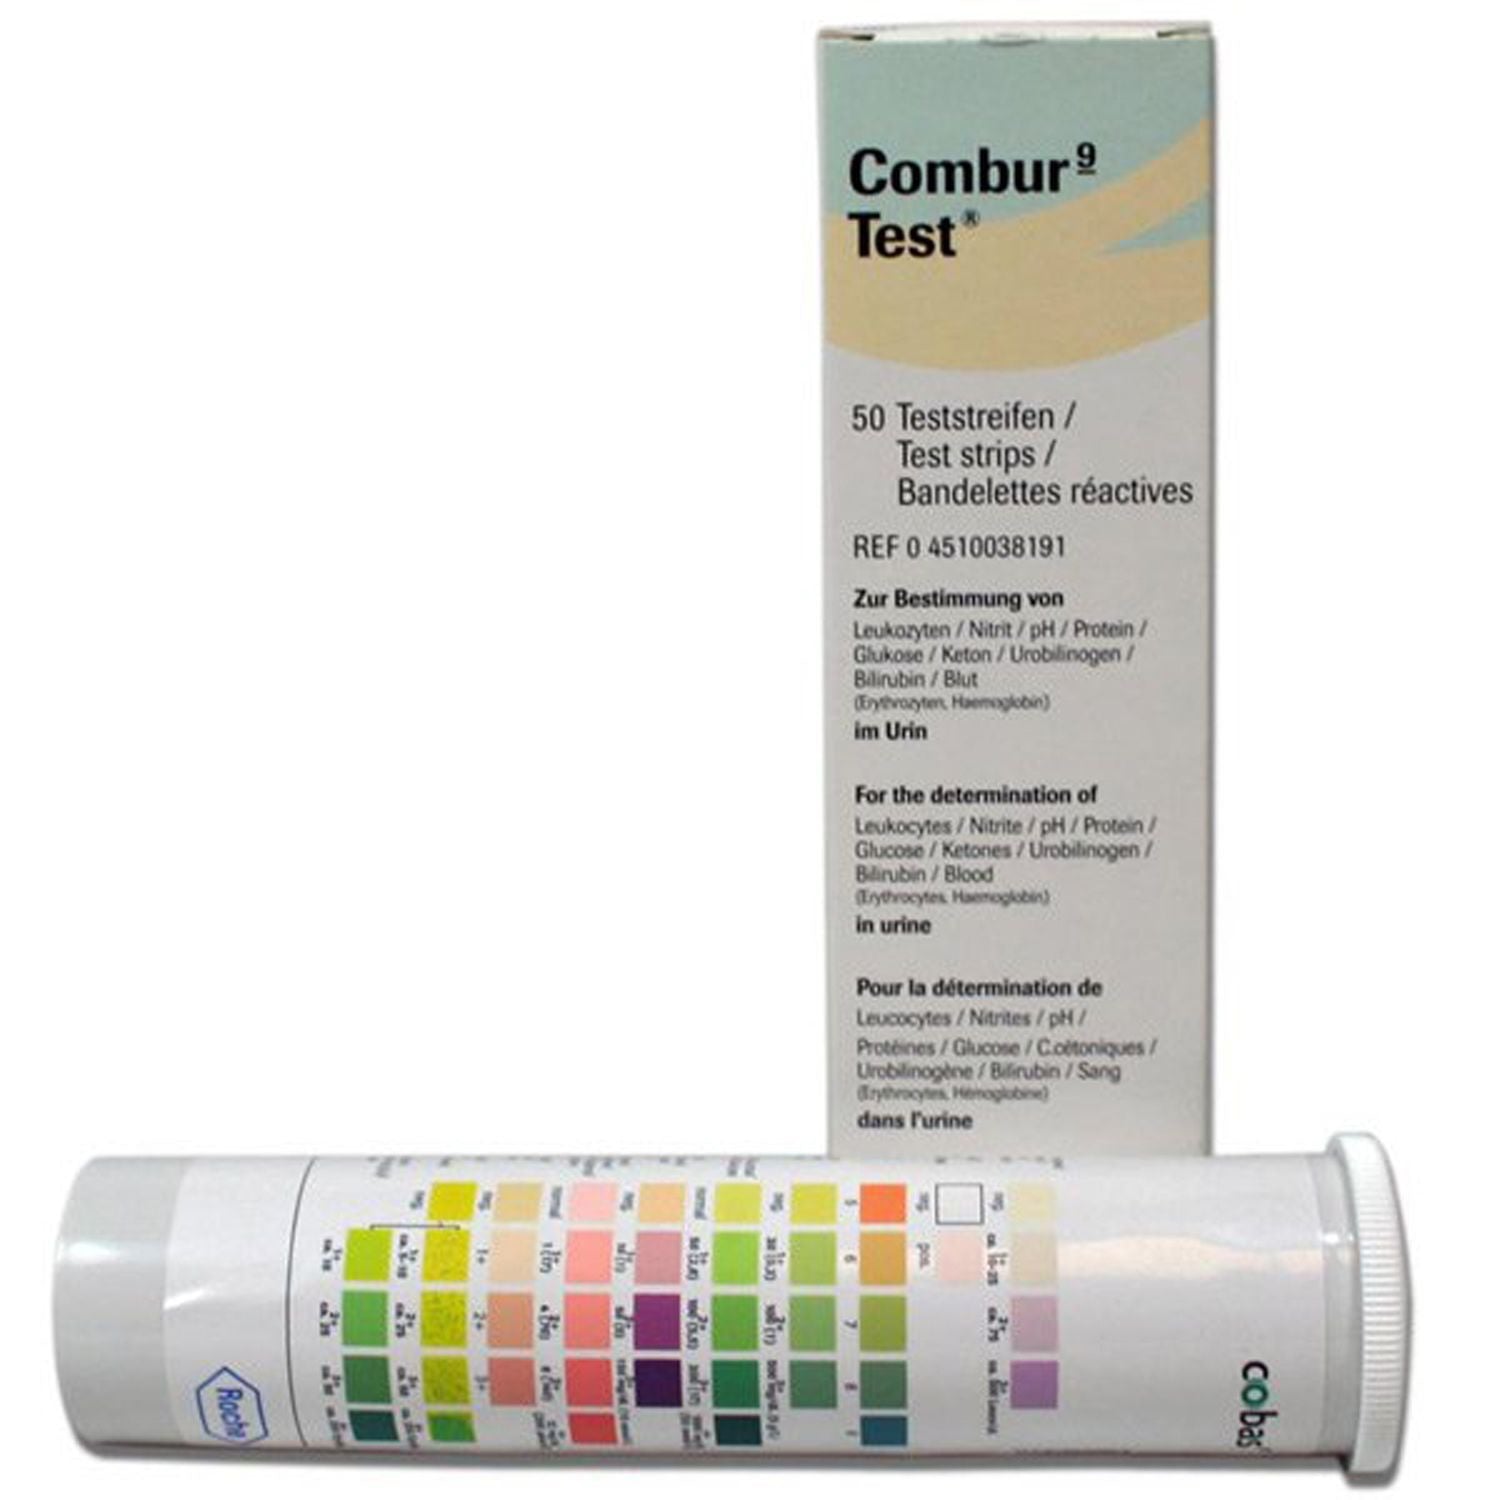 Roche Urinalysis Reagent Strips Combur9 Test | Pack of 50 | Short Expiry Date